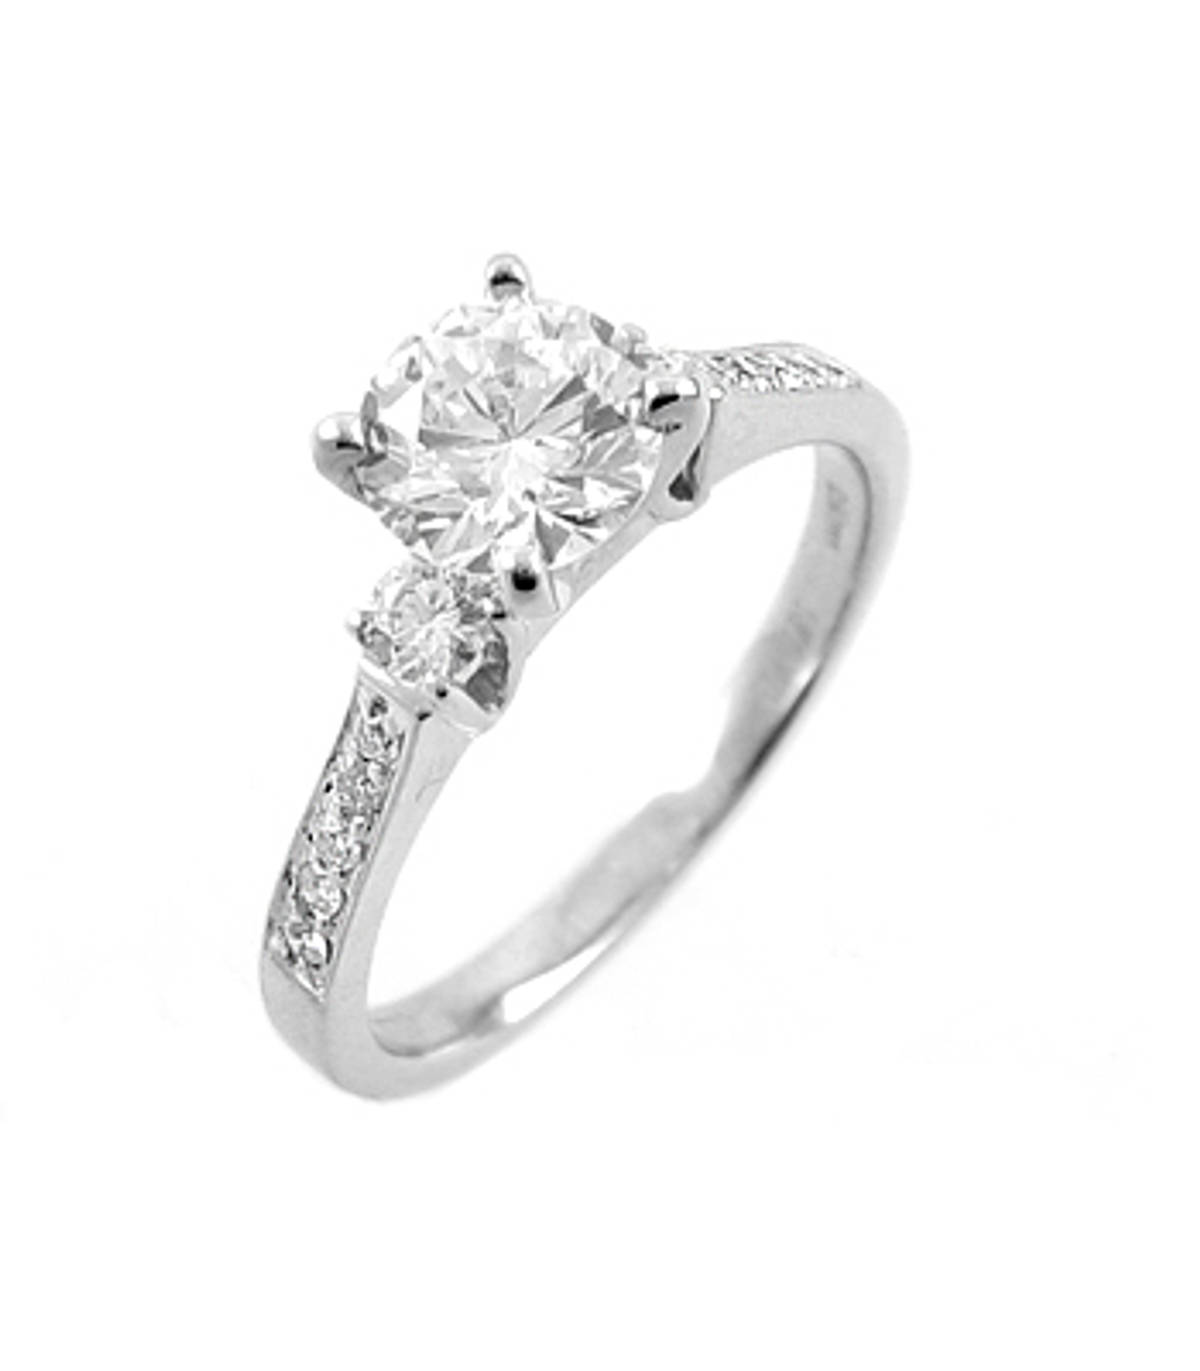 18ct white gold irish-made engagement ring with one 0.40 carat brilliant cut centre diamond, and 0.20 carat brilliant cut diamonds in shoulders.